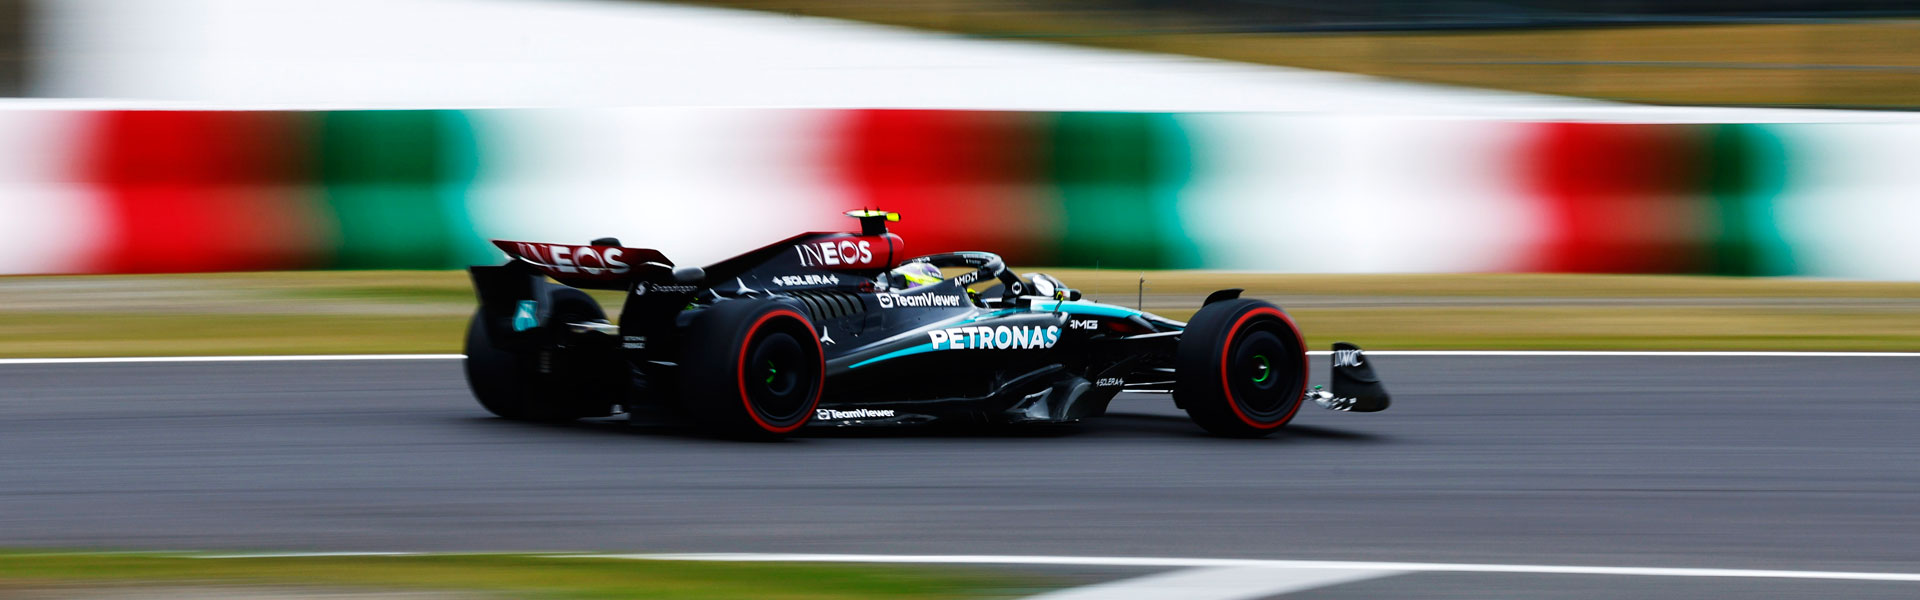 It’s Hamilton in P2 and Russell in P11 at Chinese GP Sprint Quali!